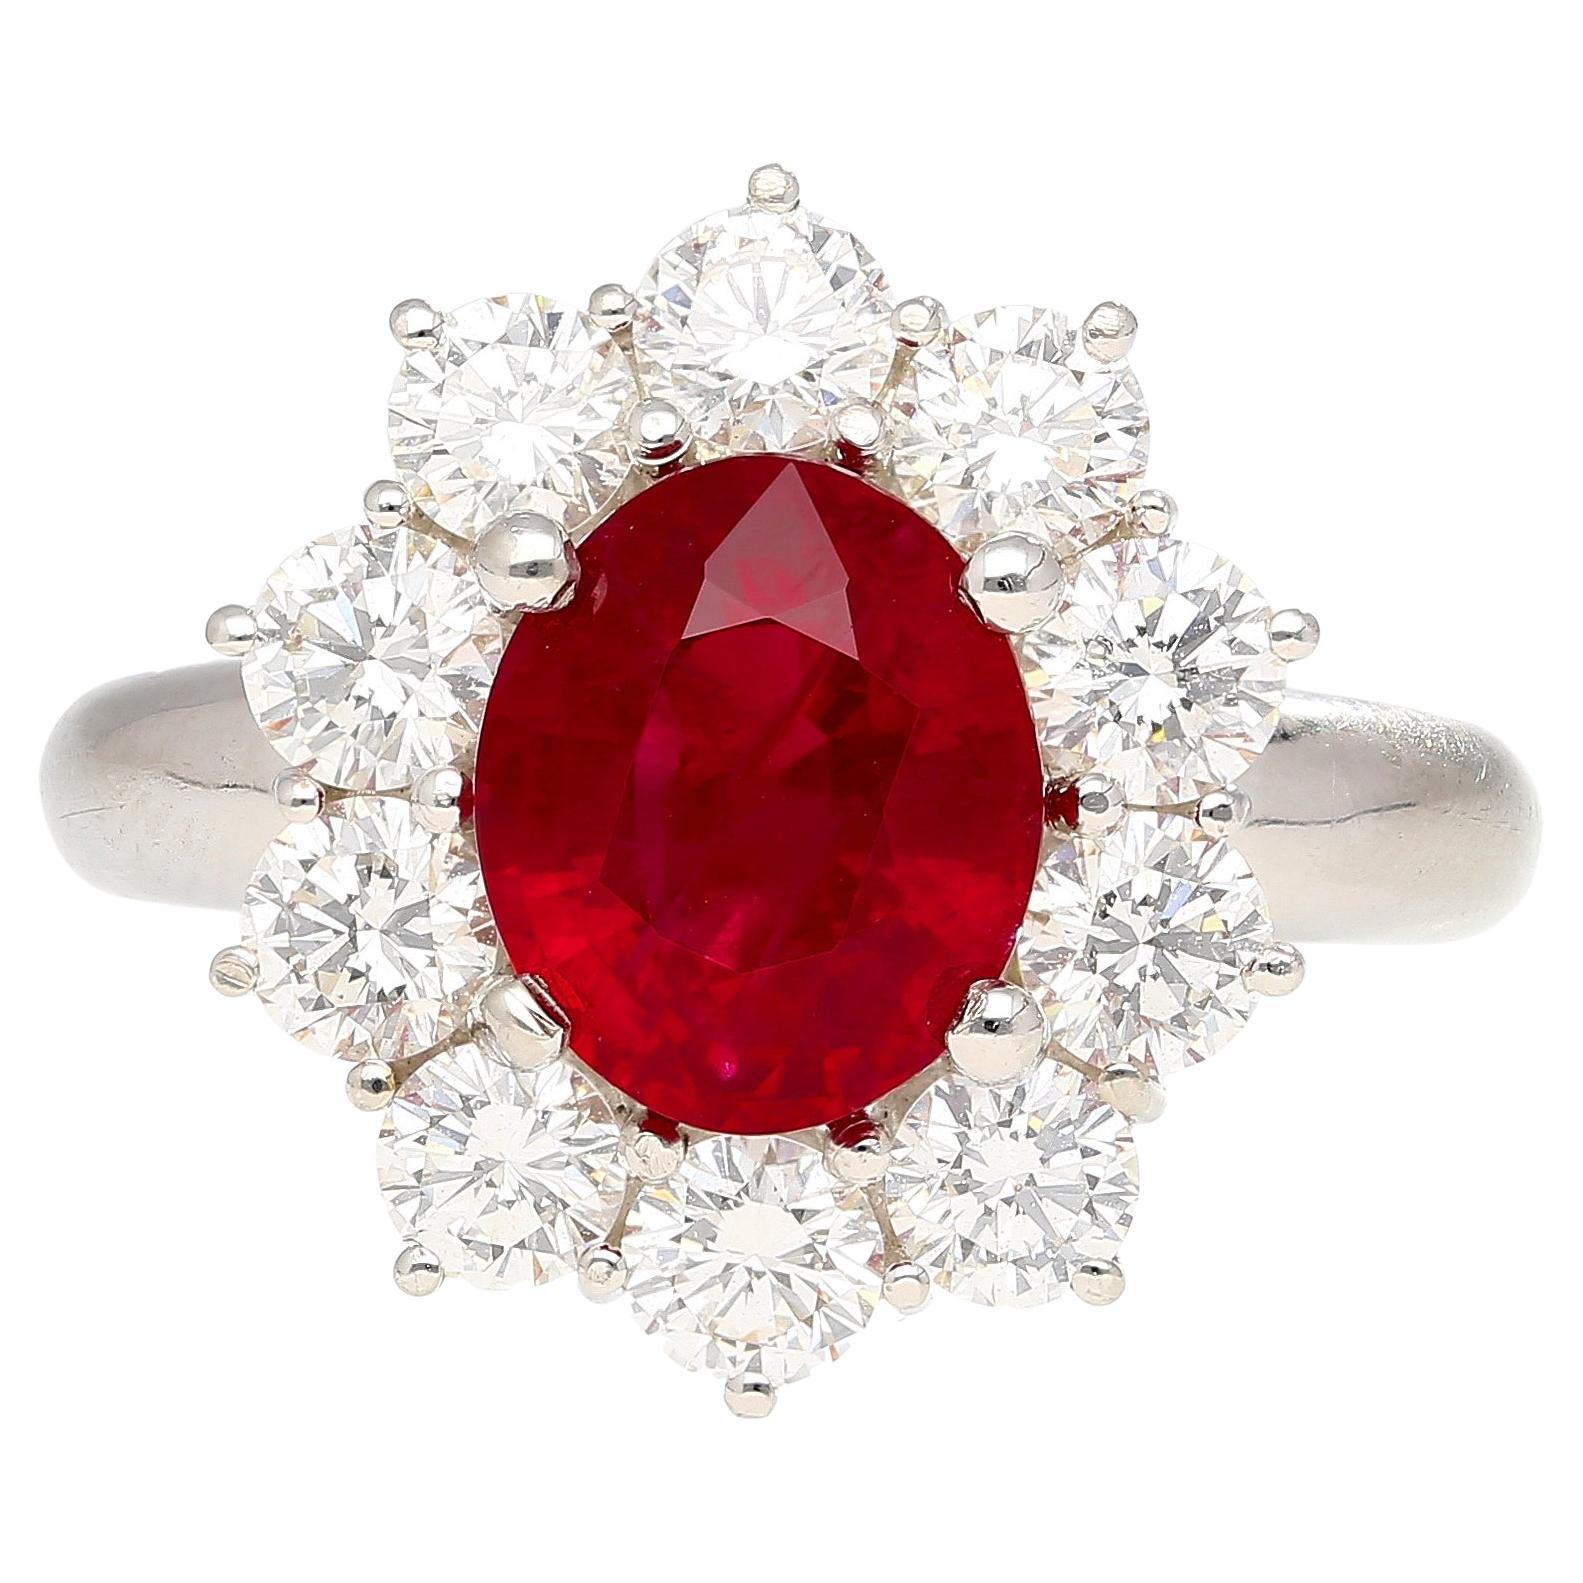 3 Carat Vivid Red Pigeons Blood Burma Ruby Ring with Diamonds in Platinum & Gold